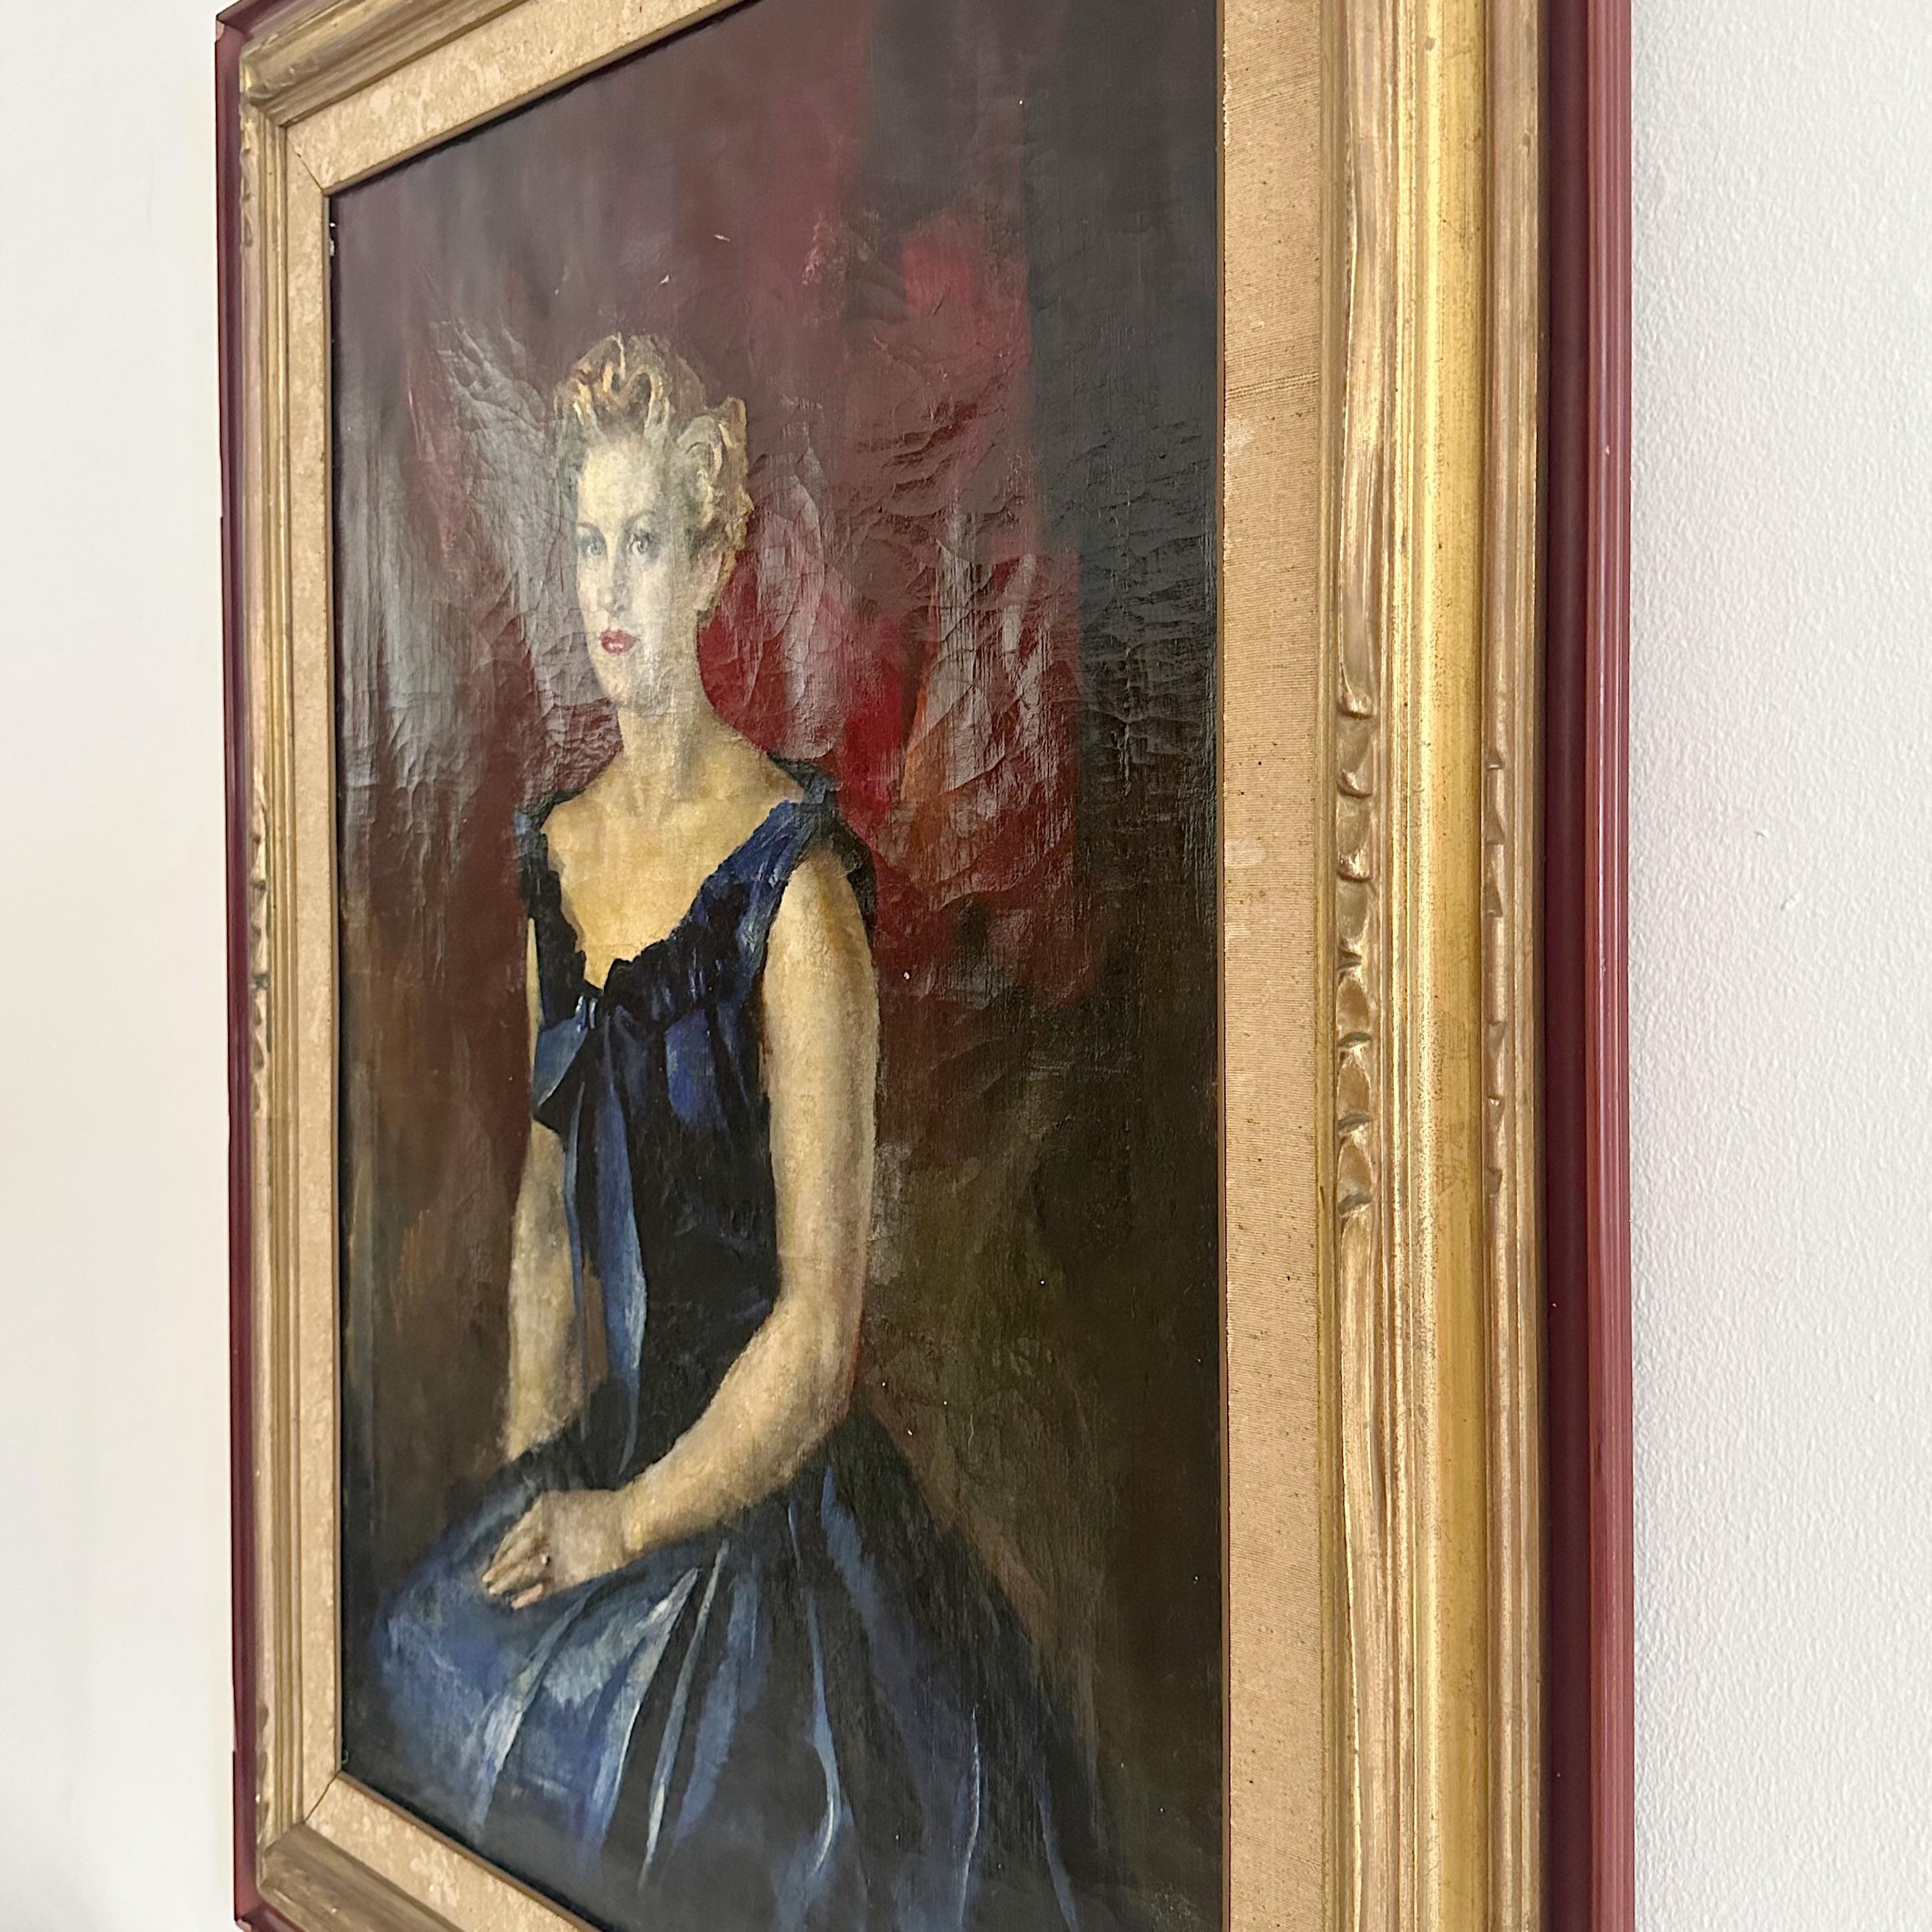 Exquisite oil on canvas portrait of a young lady in stunning blue dress, signed on the front bottom right Guilio Salti, also signed on reverse with original Florentine Gallery Label.
Giulio Salti (1899-1984) was born in Barberino di Mugello